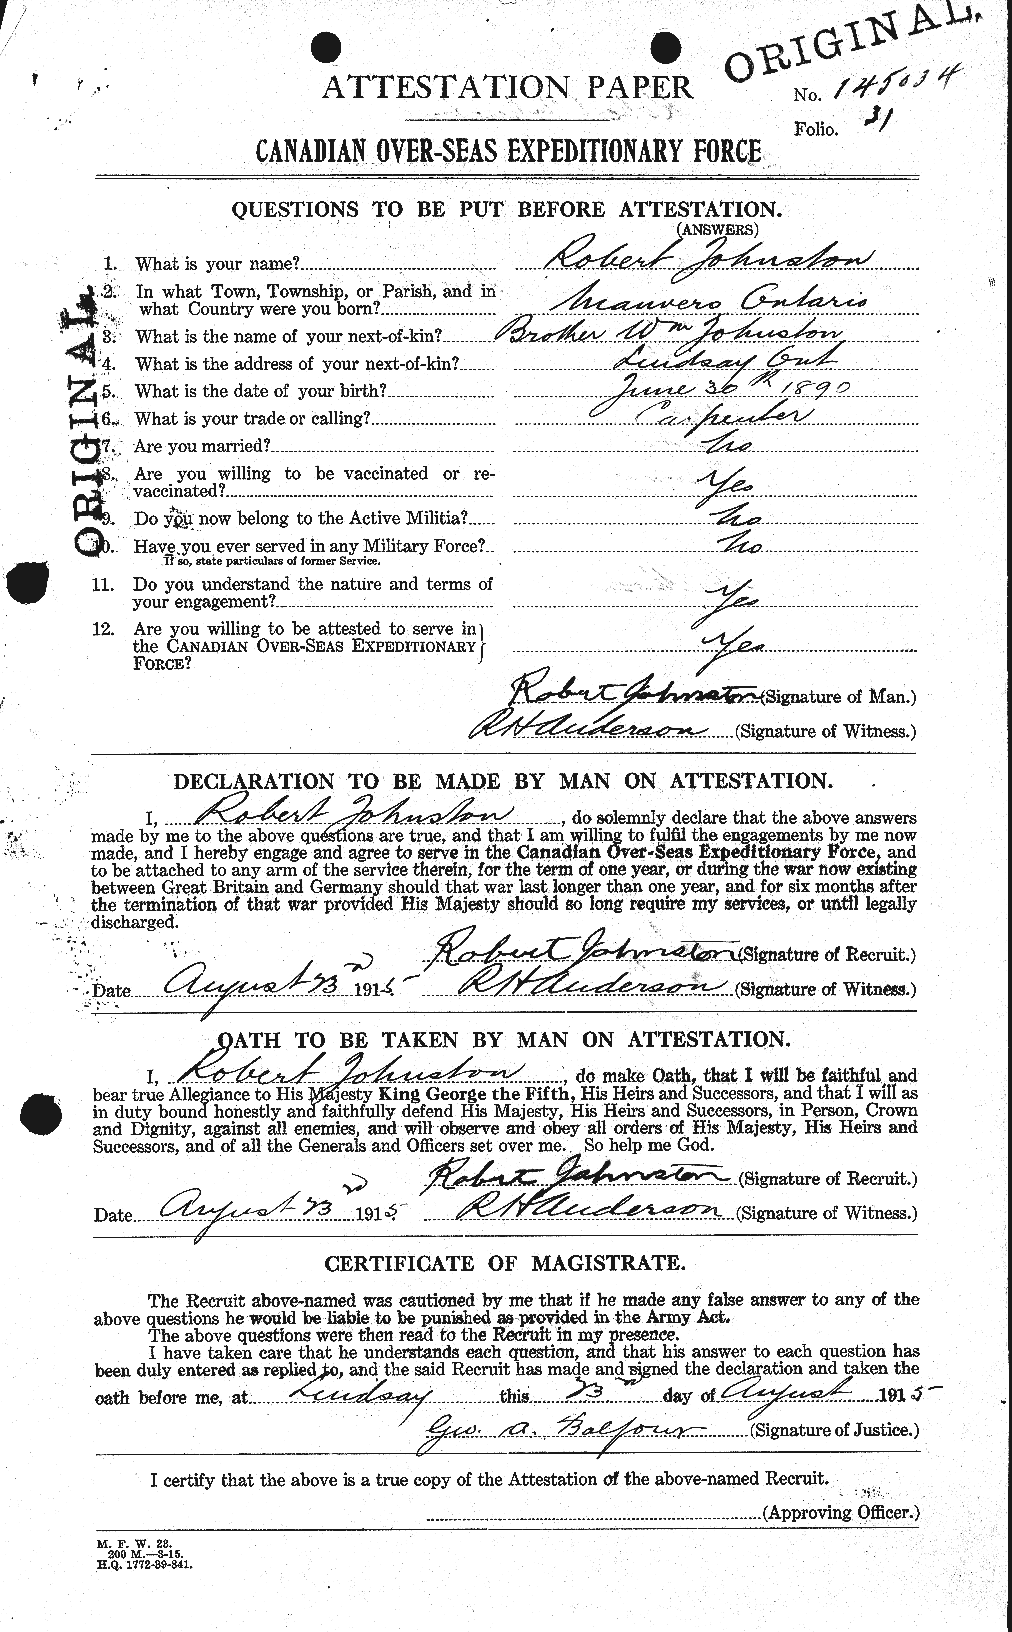 Personnel Records of the First World War - CEF 426992a